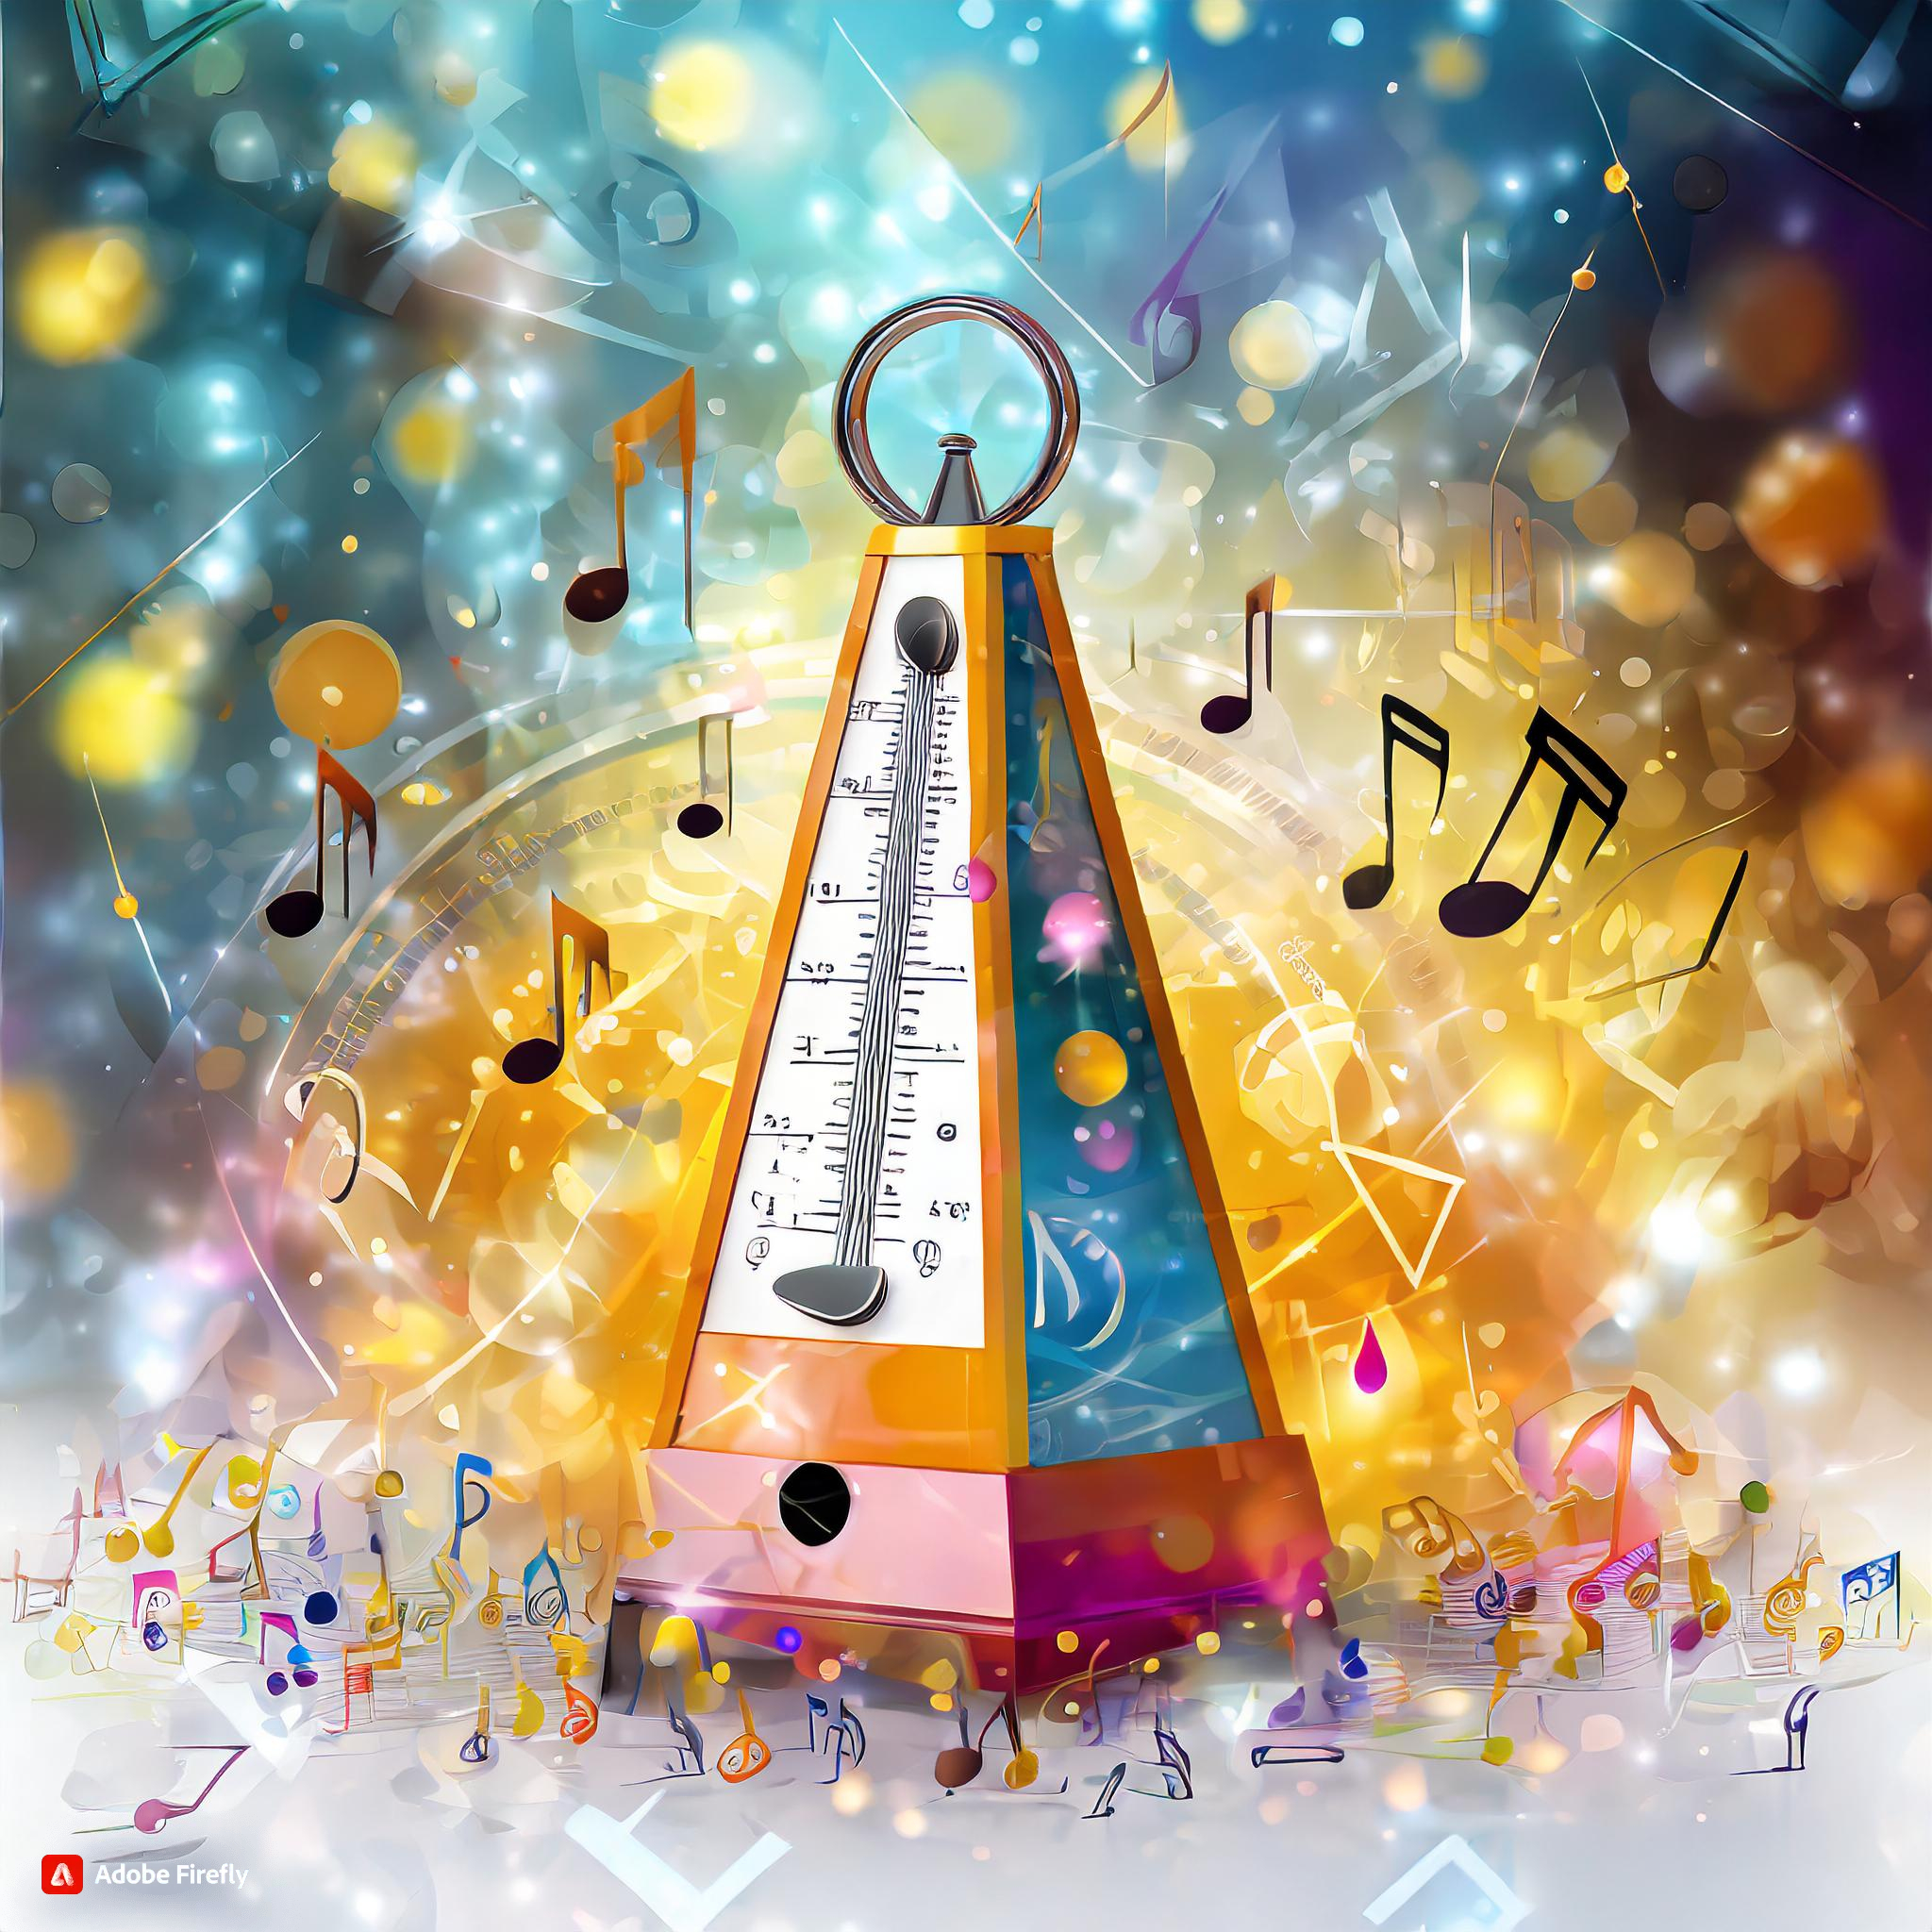 Firefly A metronome surrounded by musical symbols and notes 36697.jpg